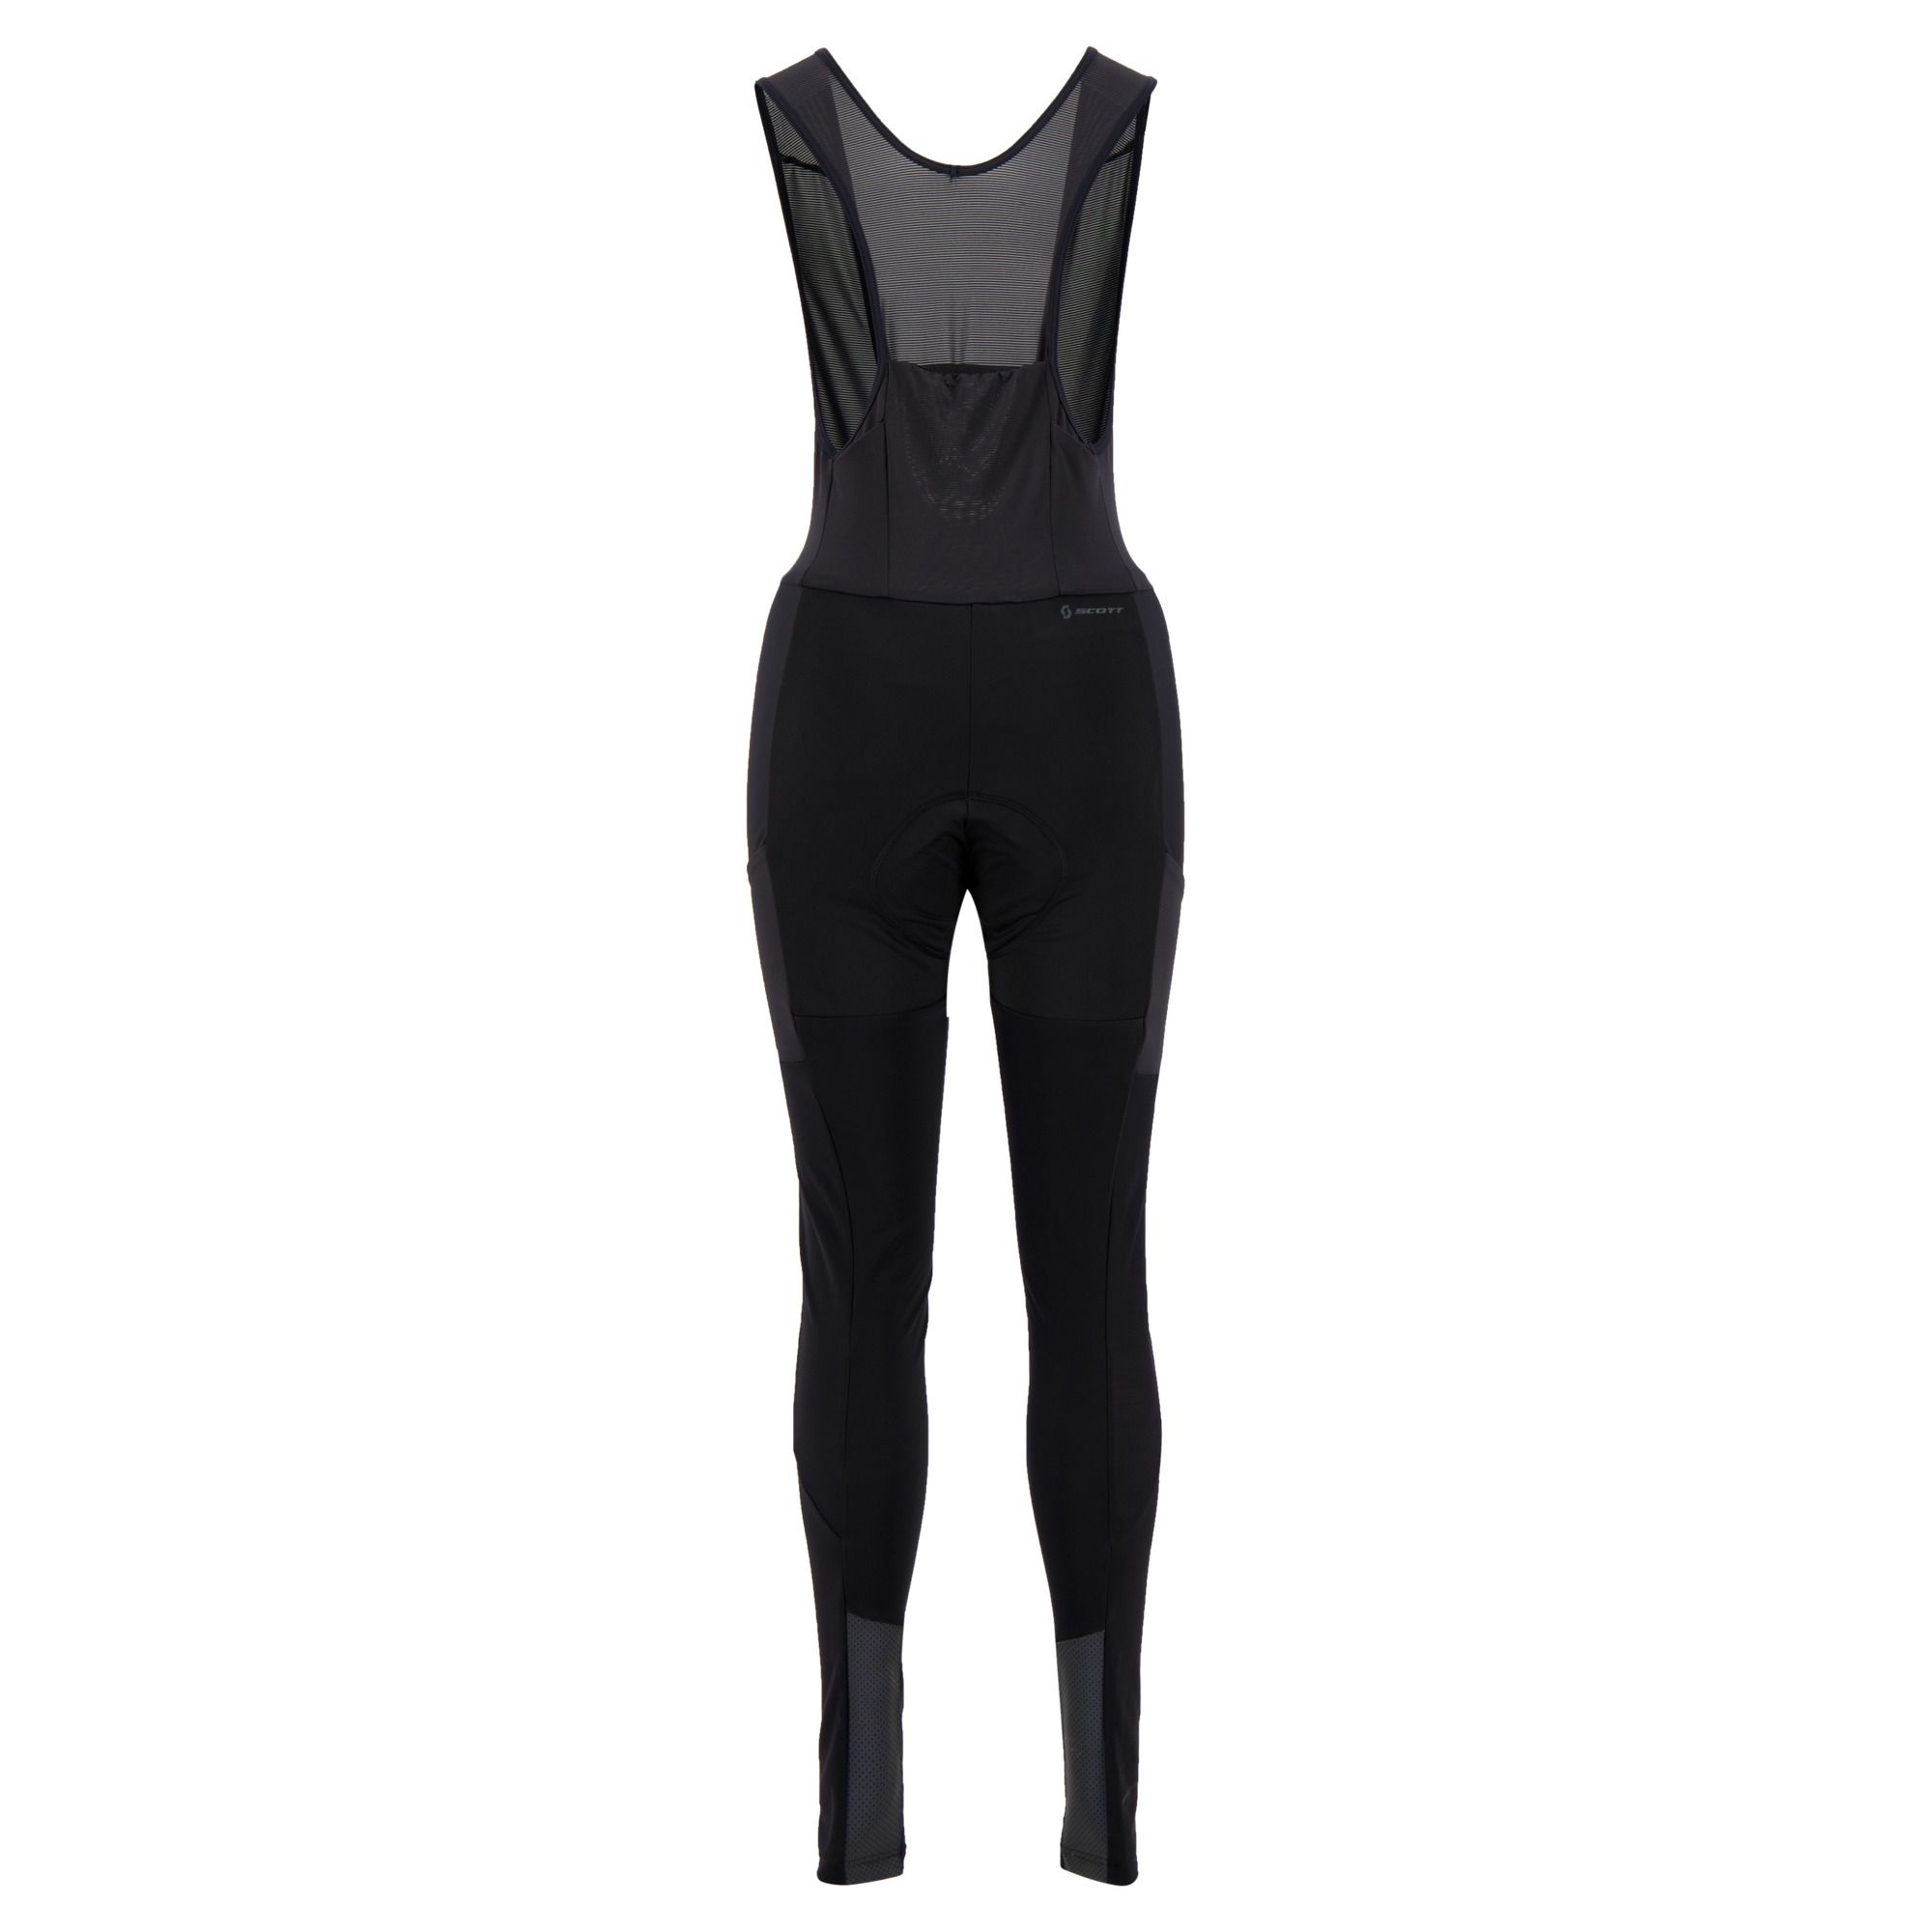 Craft Ideal Thermal Tight - Women's - Women